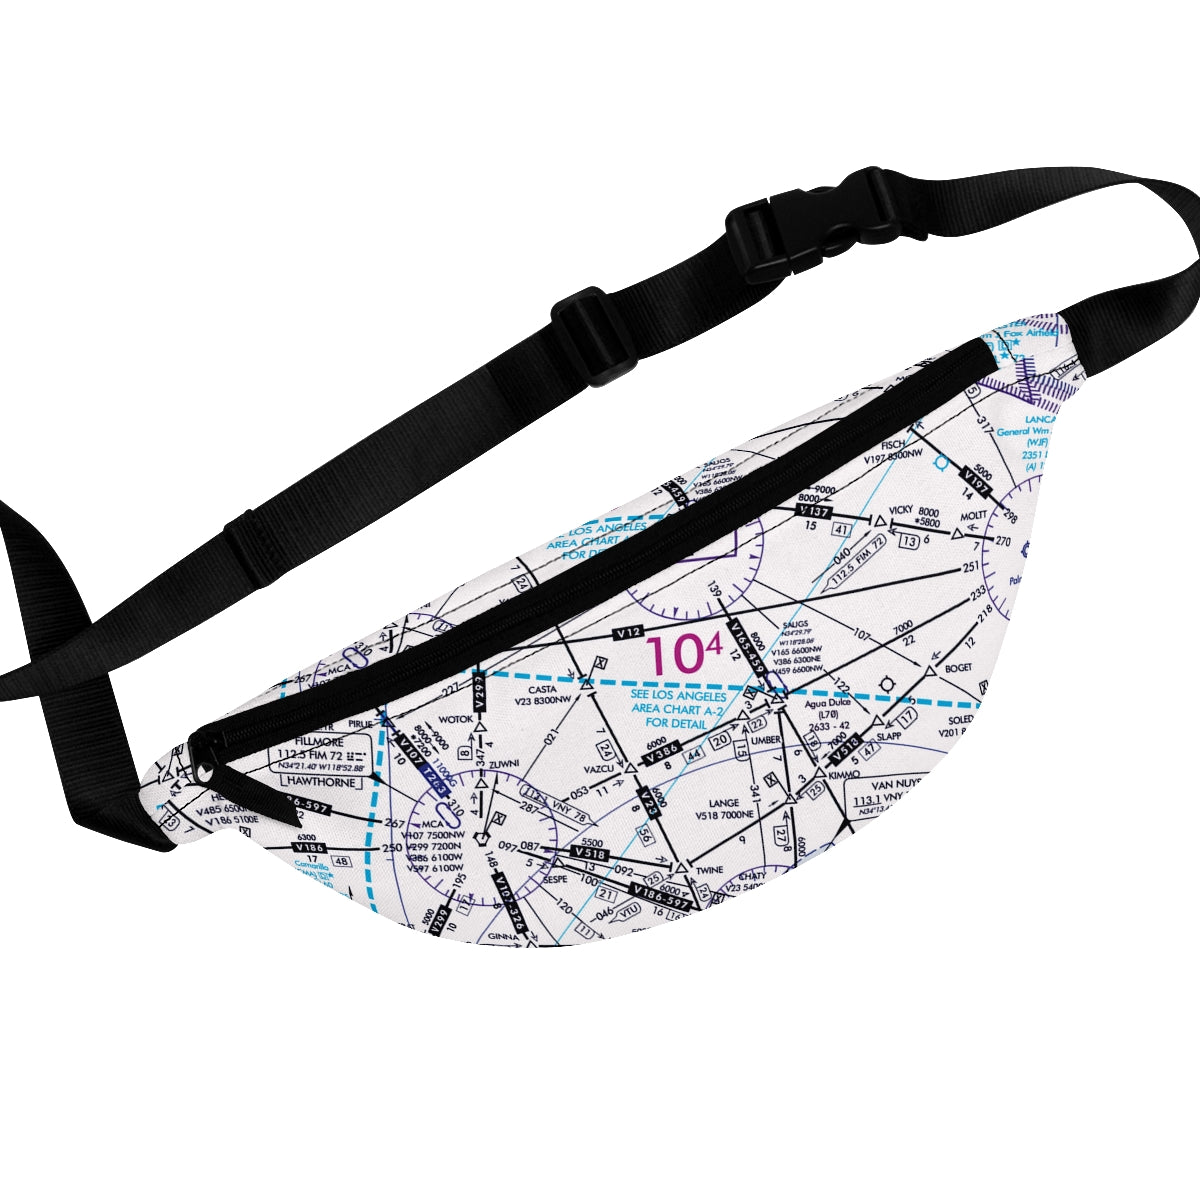 Enroute Low Altitude Chart fanny pack (white)